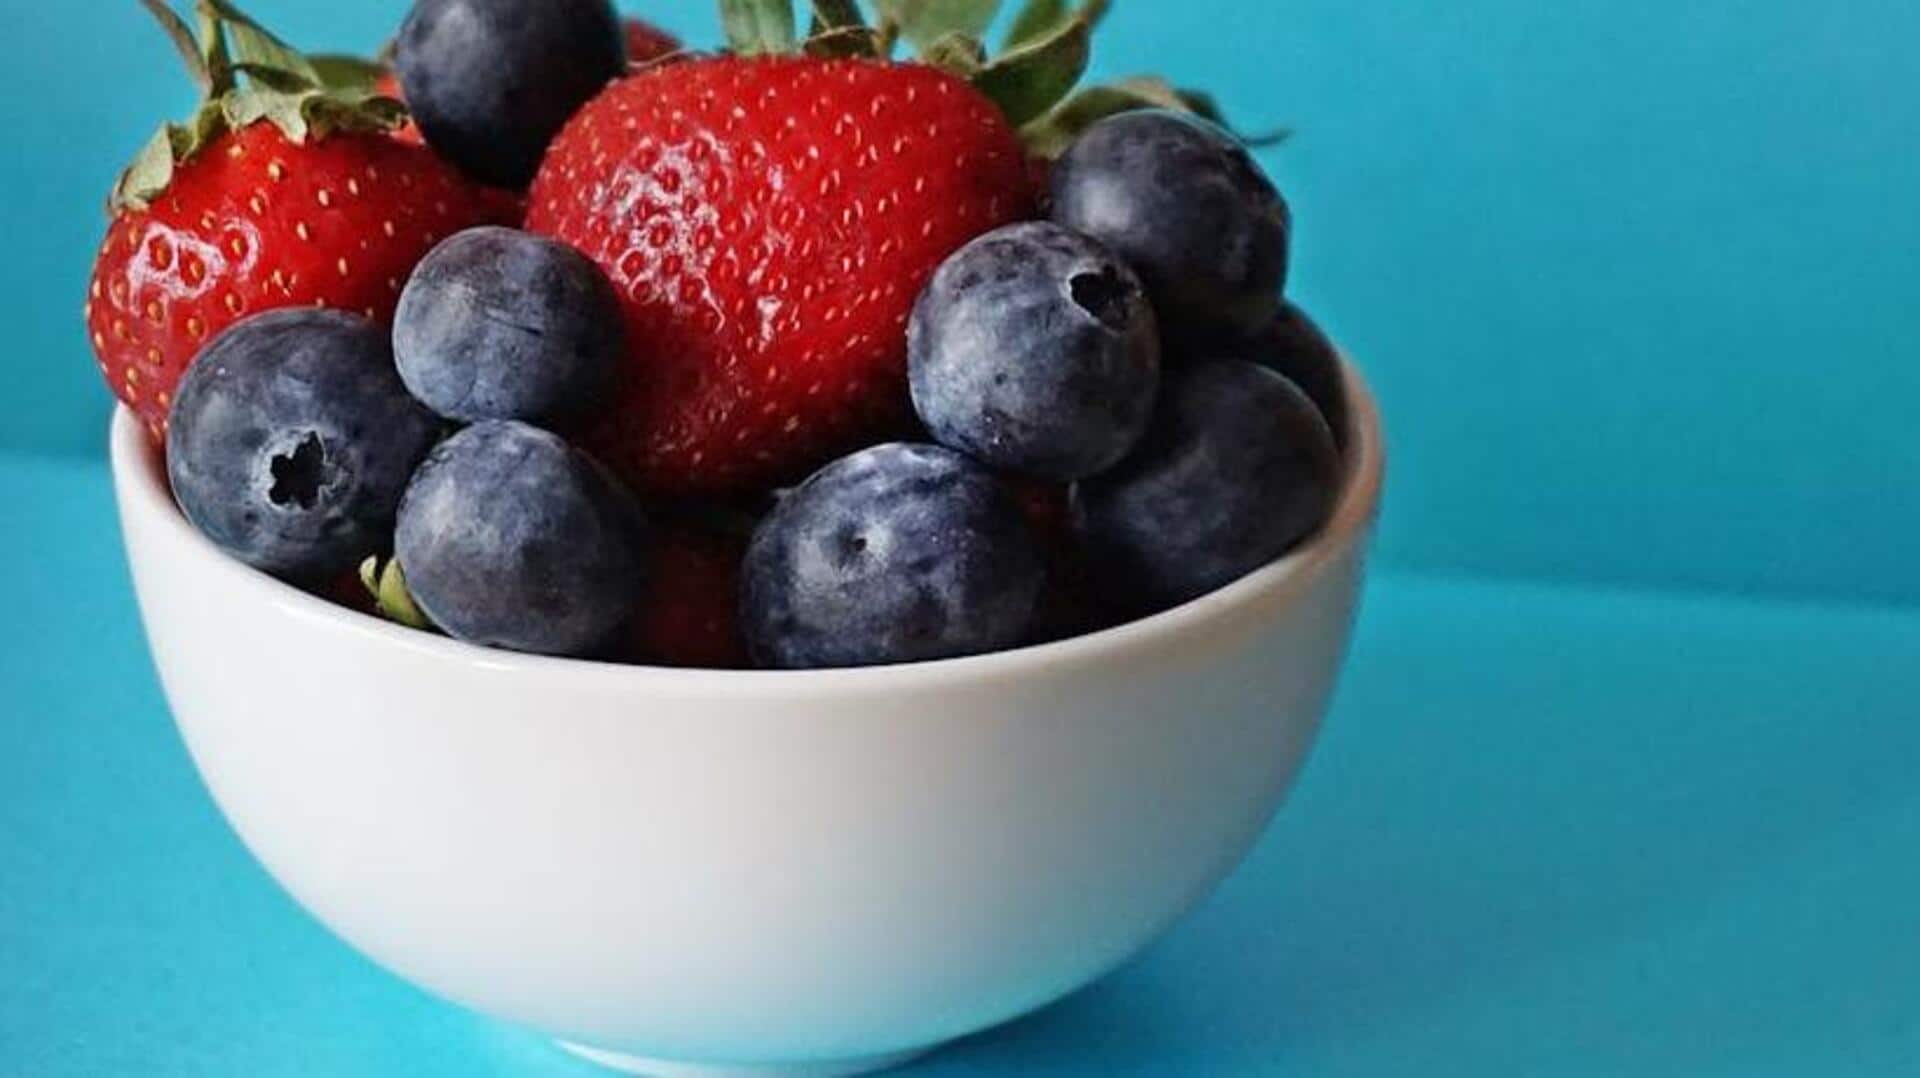 Berry-infused dishes that are good for your hair